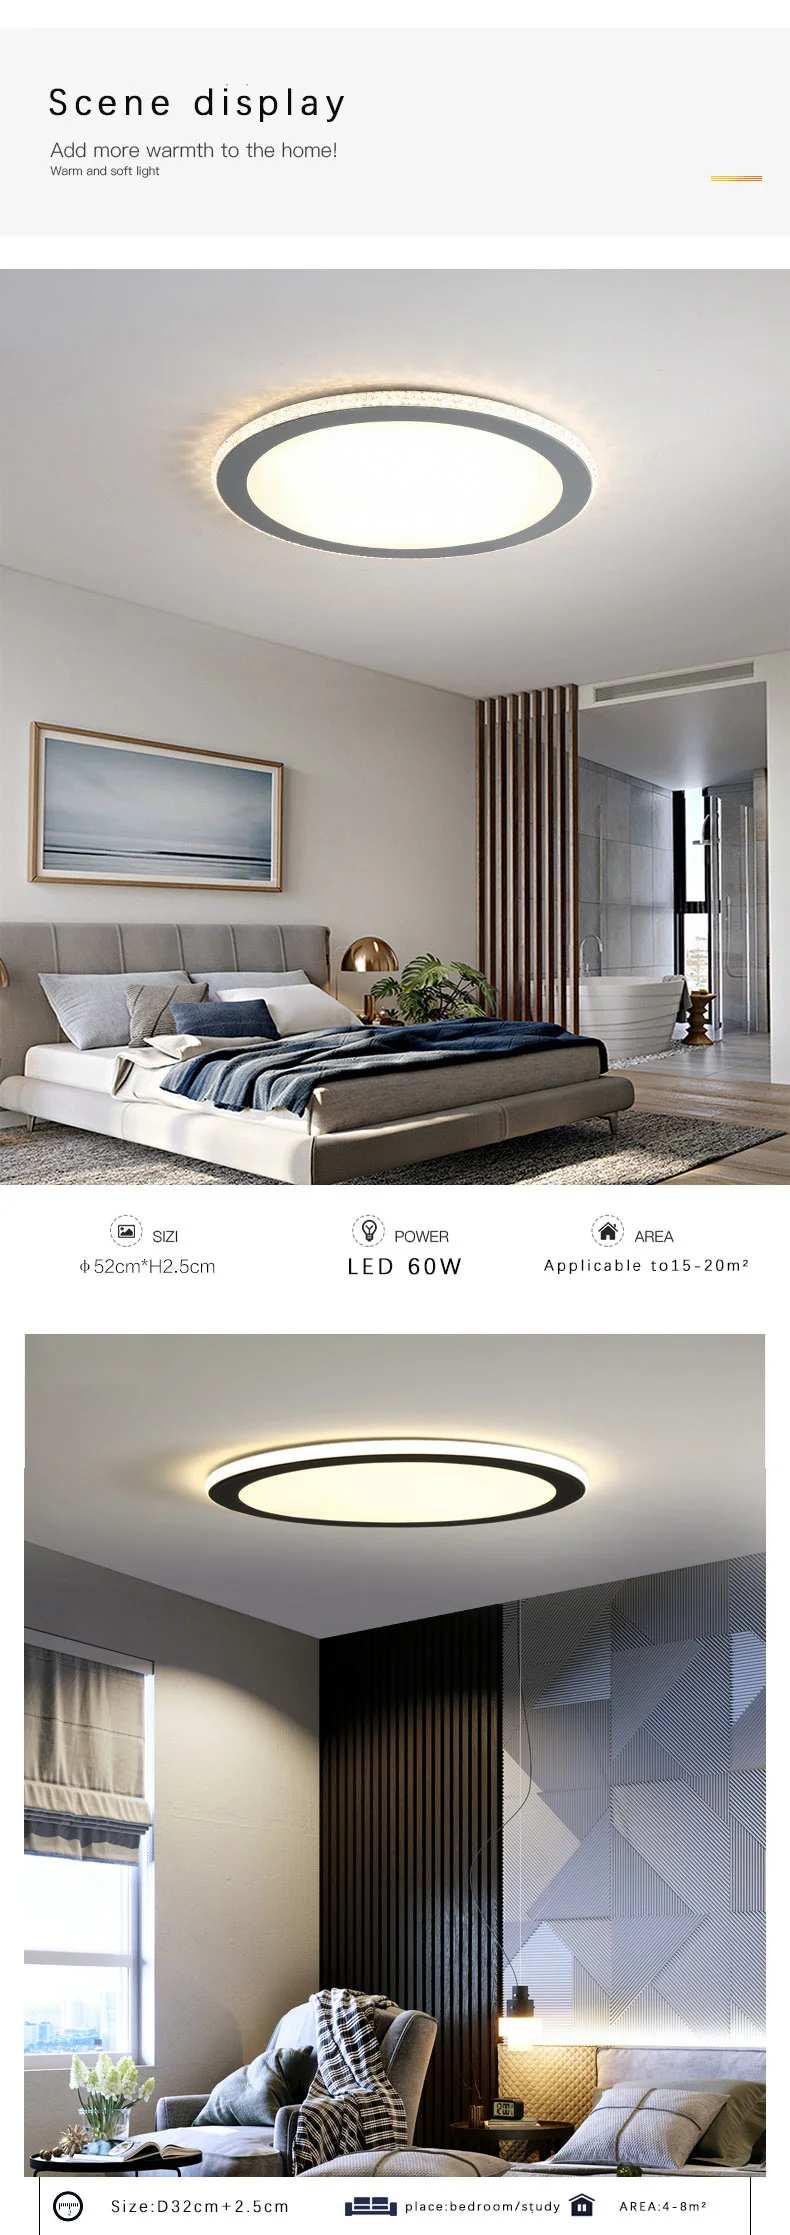 LED ultra-thin ceiling light modern simple room lighting creative personality side lights led lighting porch ceiling light fall ceiling light